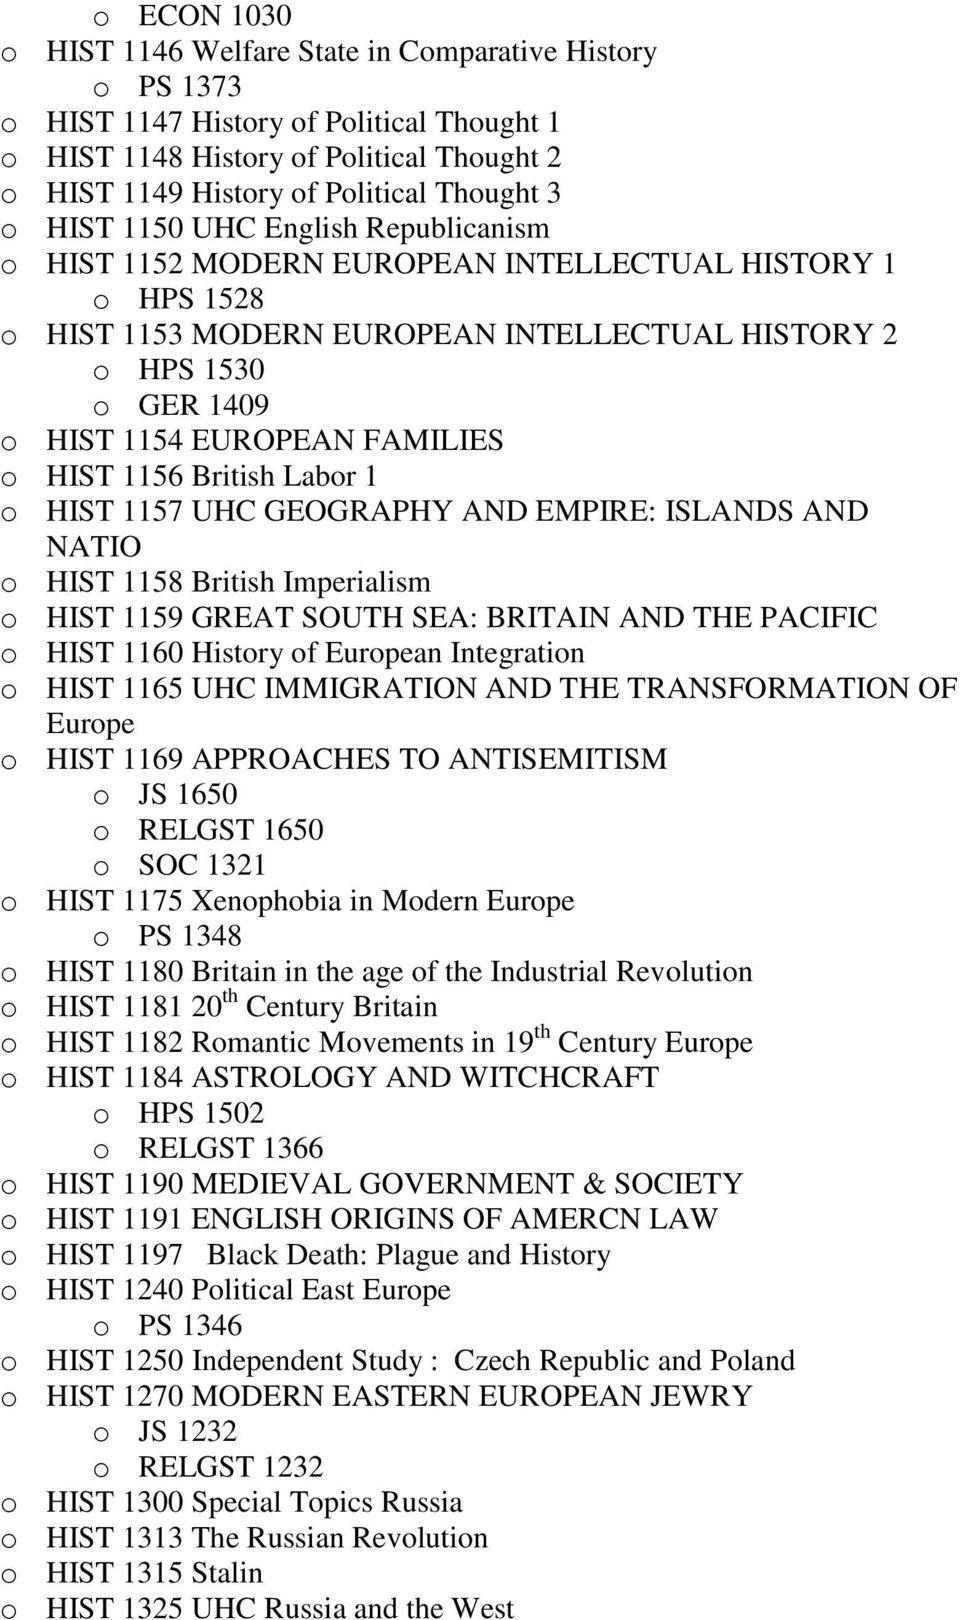 FAMILIES o HIST 1156 British Labor 1 o HIST 1157 UHC GEOGRAPHY AND EMPIRE: ISLANDS AND NATIO o HIST 1158 British Imperialism o HIST 1159 GREAT SOUTH SEA: BRITAIN AND THE PACIFIC o HIST 1160 History